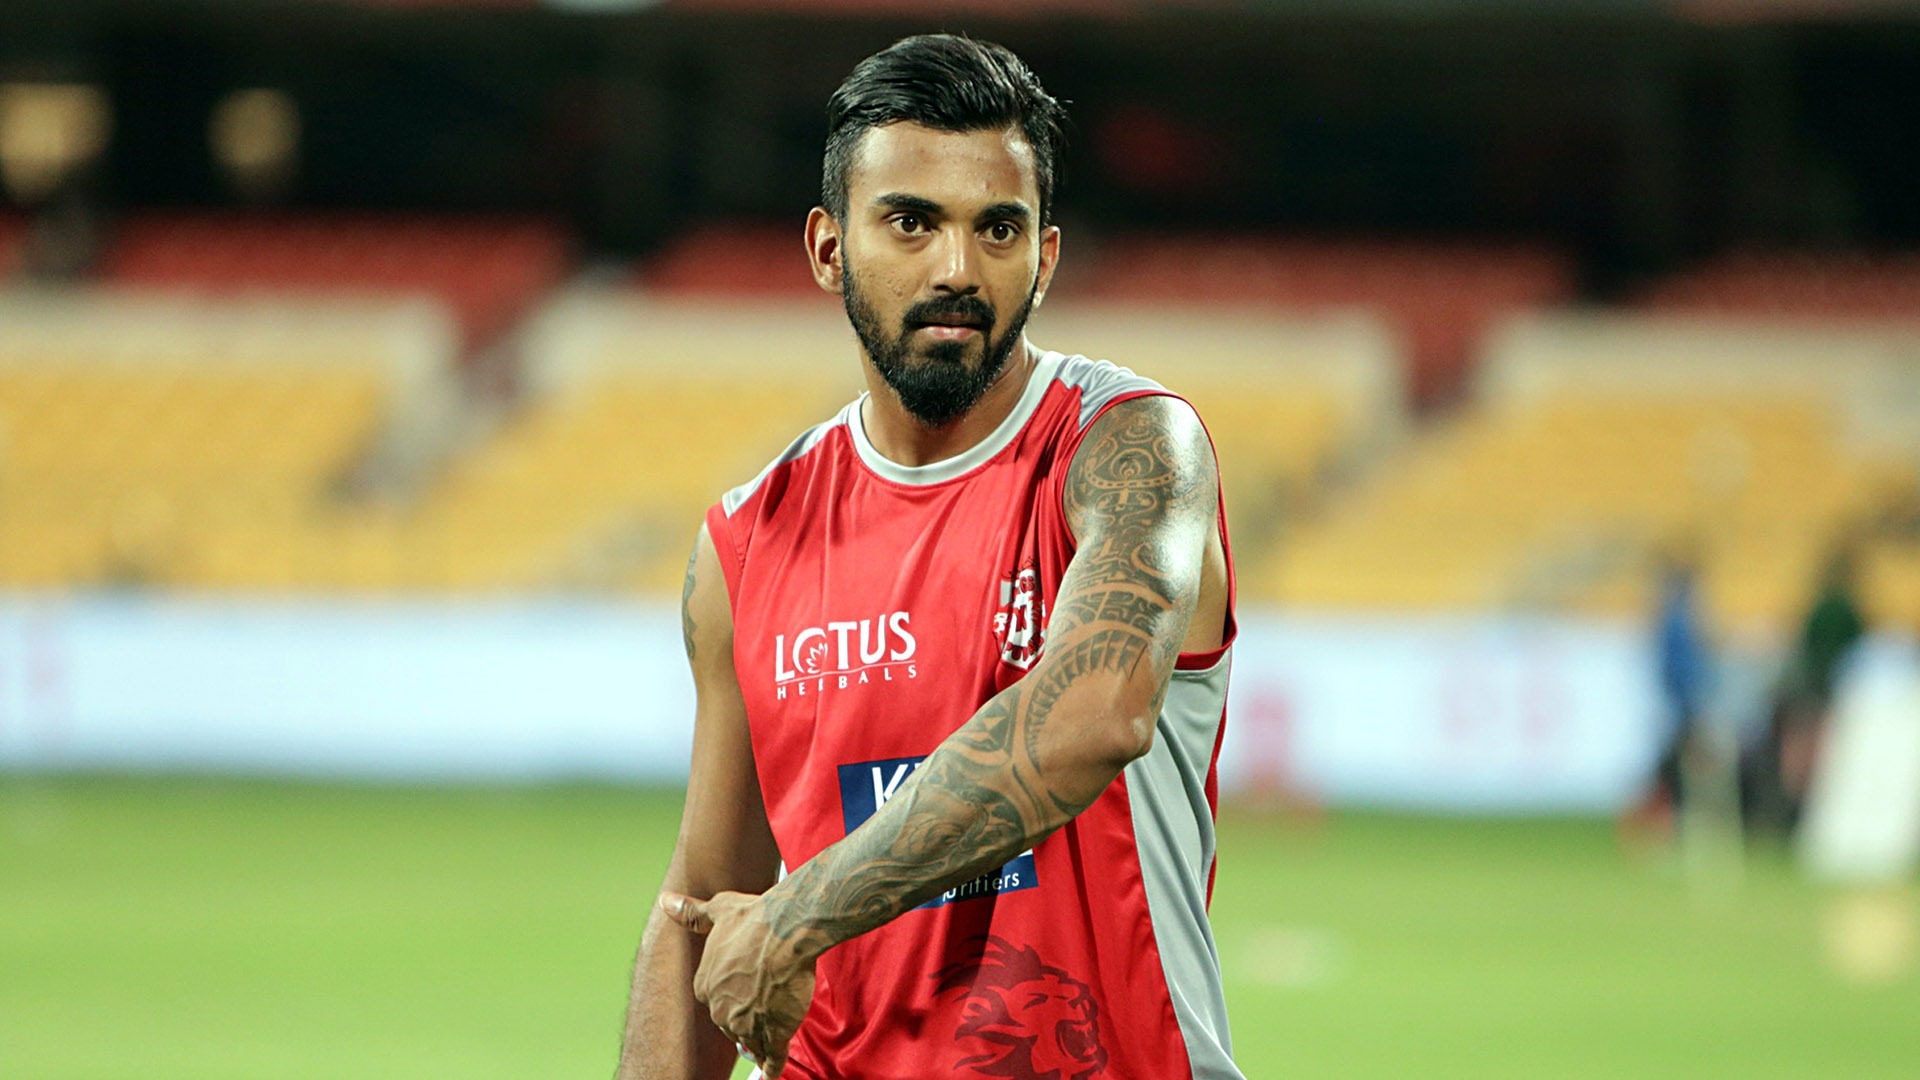 KL Rahul responded in one of the sweetest ways when a fan called him Thala